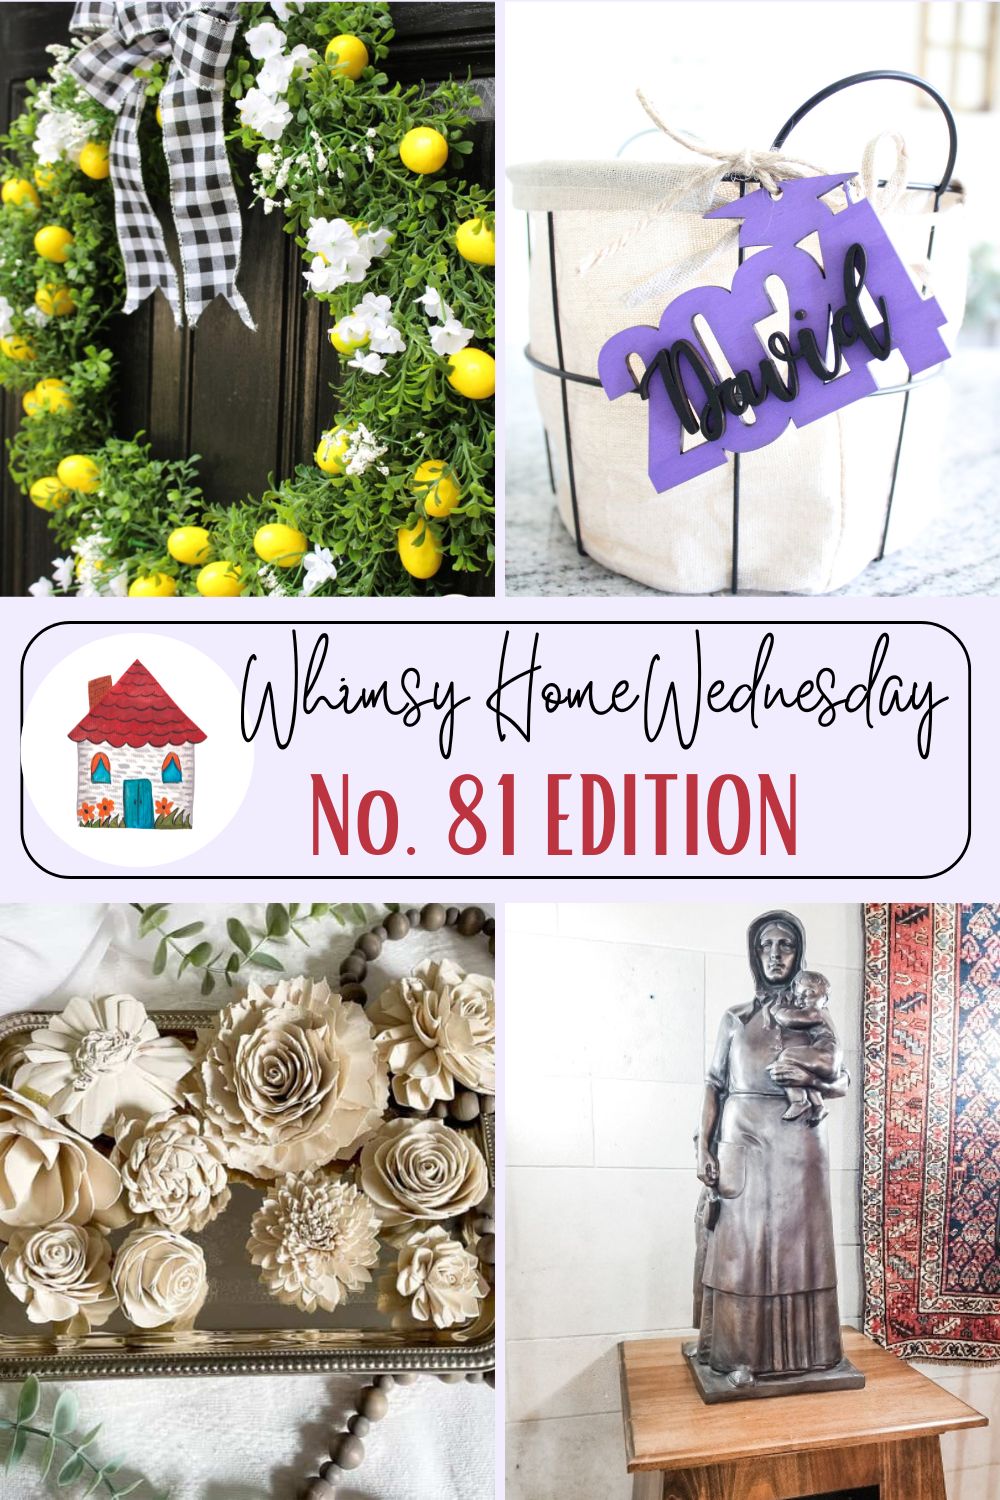 Join us on Whimsy Home Wednesday Blog Link Party No. 81 and see host projects, the features from the previous week and link up your posts!